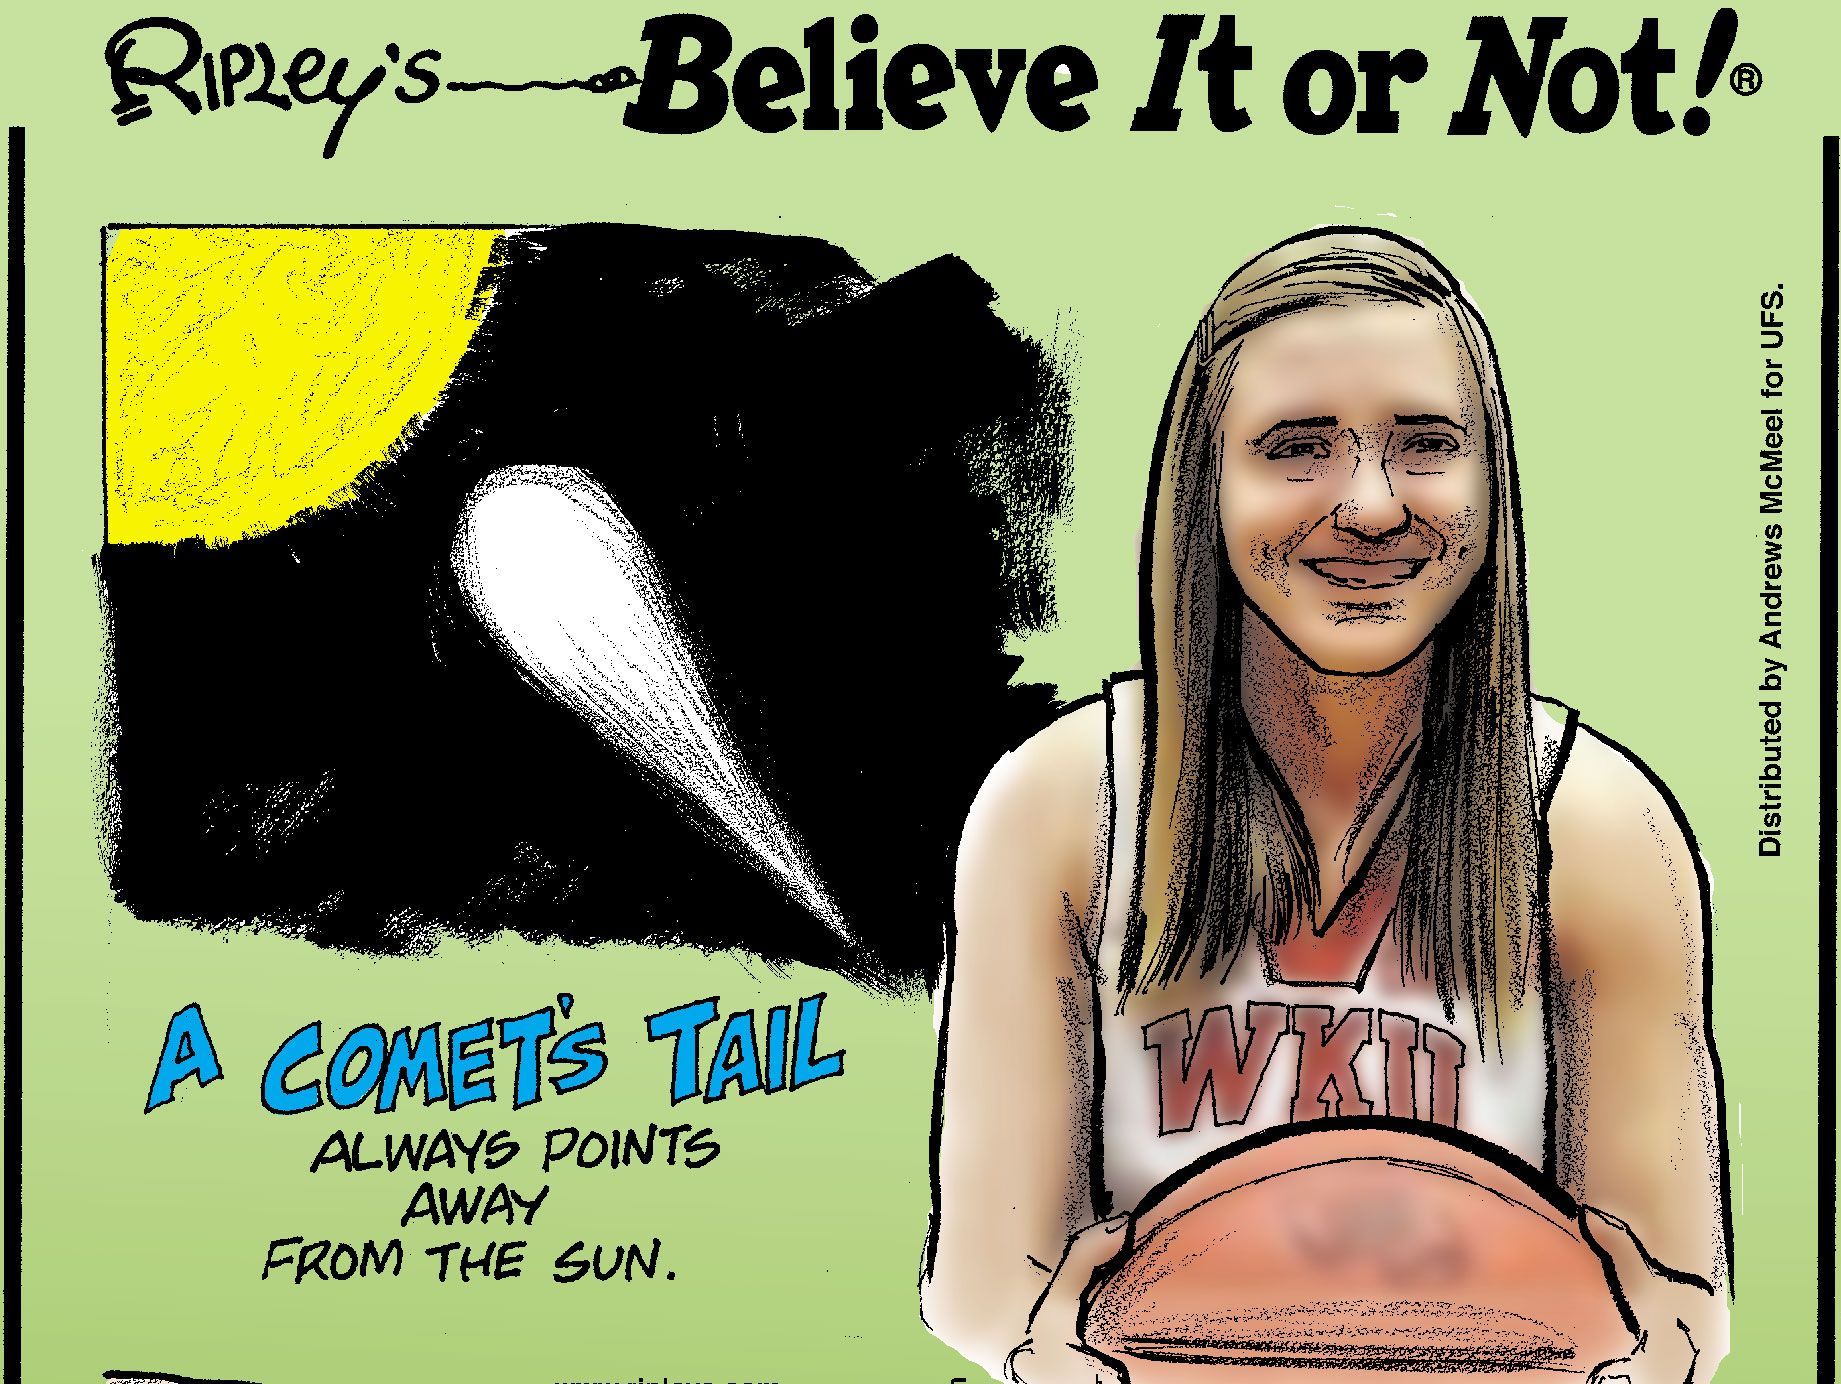 Whitney Creech, the state-record holding former Jenkins County basketball star and current WKU freshman, was featured in the March 23 Ripley's Believe it or Not comic strip.